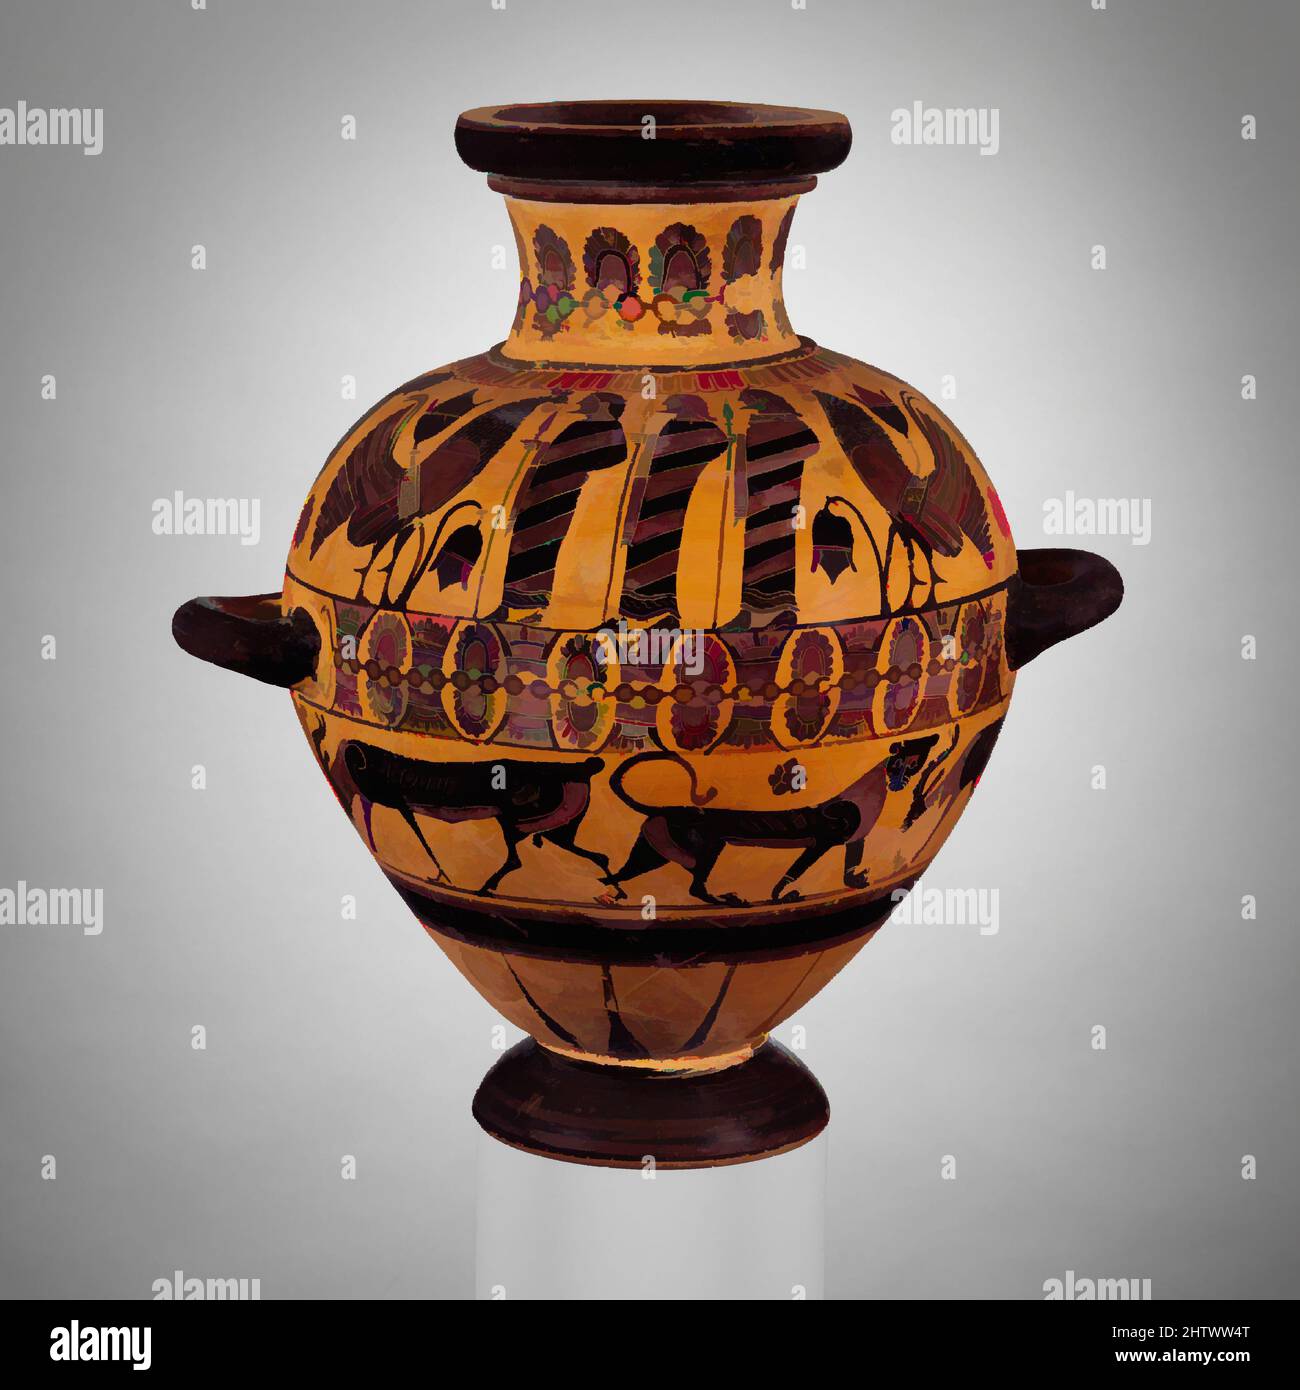 Art inspired by Terracotta hydria (water jar), Archaic, ca. 560 B.C., Greek, Attic, Terracotta; black-figure, H. 15 15/16 in. (40.5 cm), Vases, On the shoulder of this beautifully decorated vase, three men wrapped in brightly colored cloaks are flanked by large roosters and flowers as, Classic works modernized by Artotop with a splash of modernity. Shapes, color and value, eye-catching visual impact on art. Emotions through freedom of artworks in a contemporary way. A timeless message pursuing a wildly creative new direction. Artists turning to the digital medium and creating the Artotop NFT Stock Photo